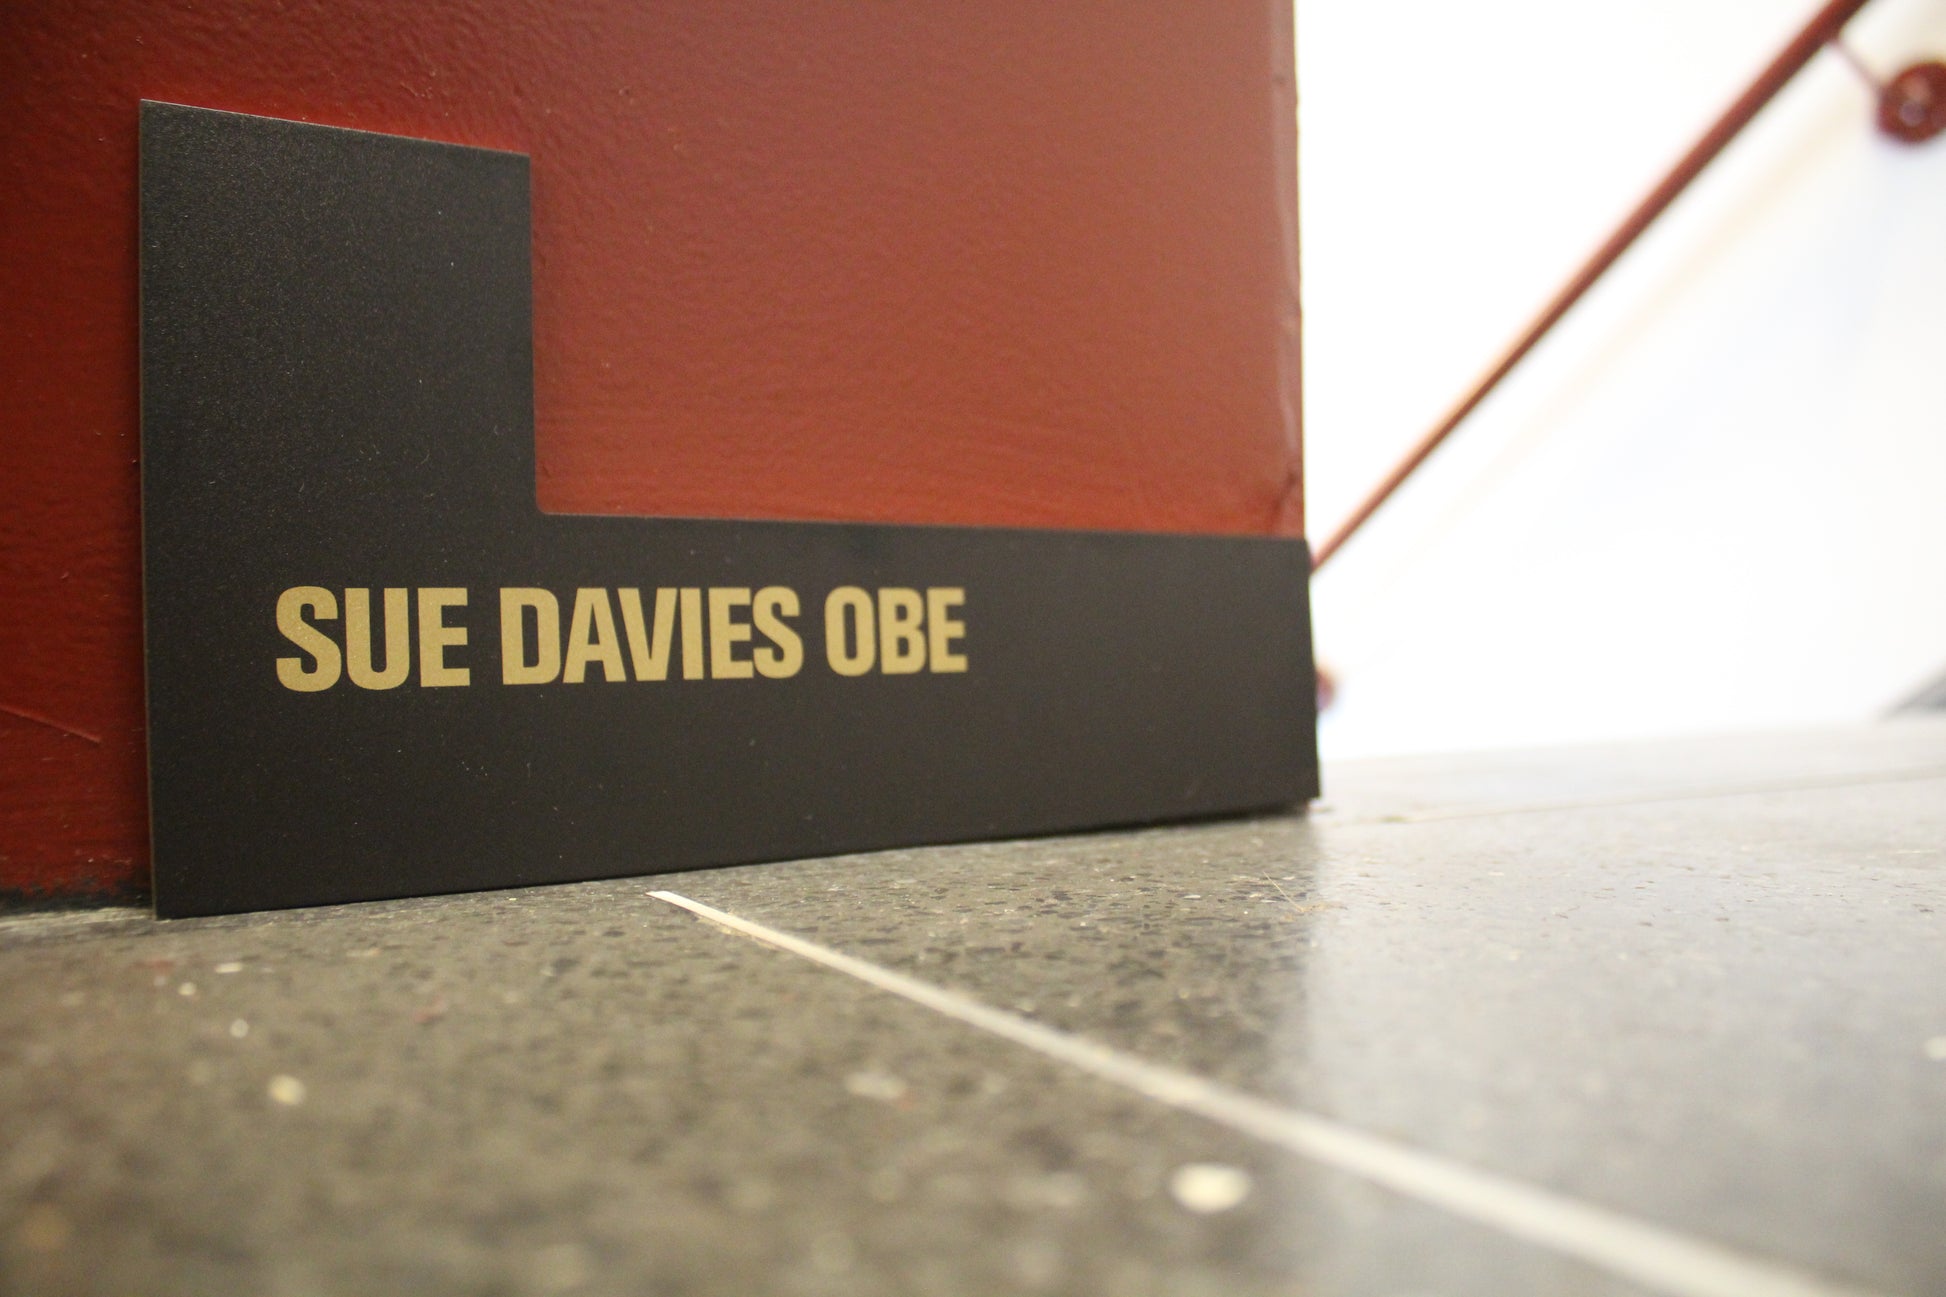 L shaped plaque with 'Sue Davies OBE' written in gold.